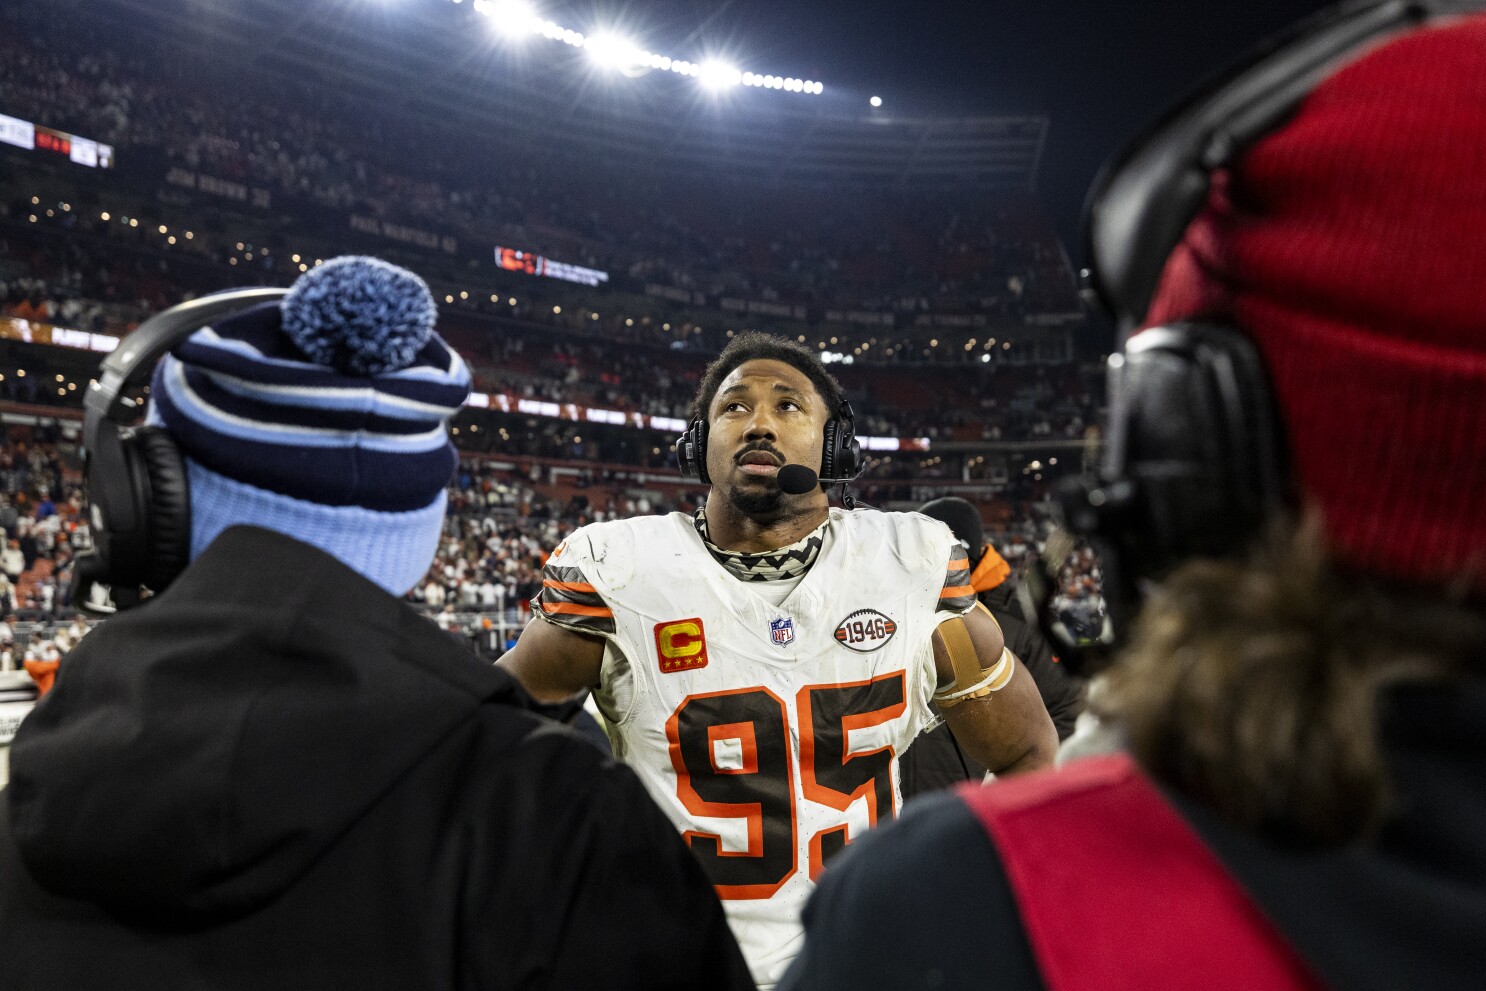 Myles Garrett Faces Personal Loss but Powers Through for Browns Victory